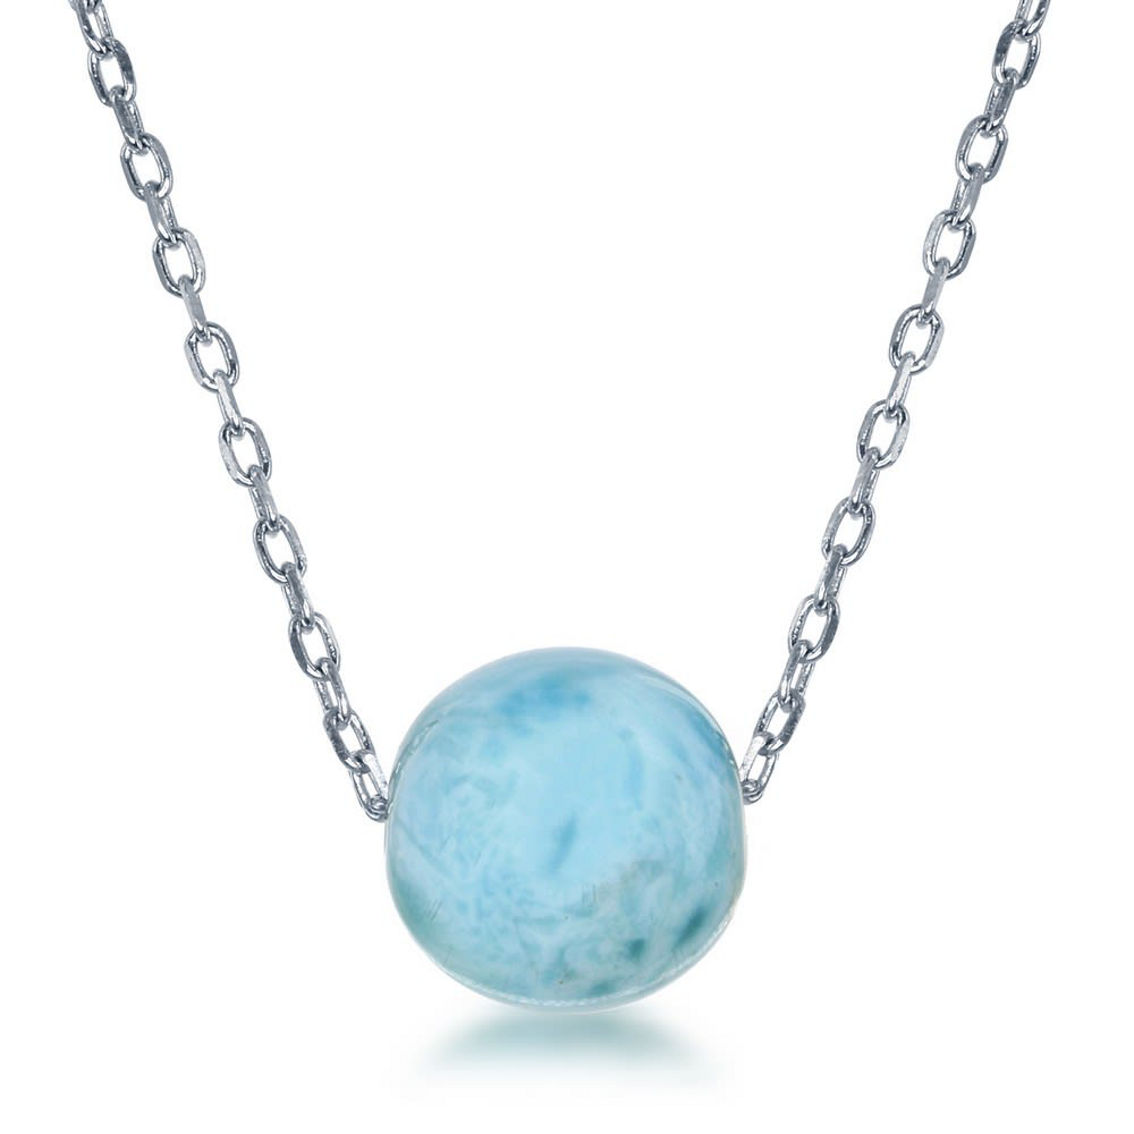 Caribbean Treasures Sterling Silver 10MM Round Larimar Bead Necklace